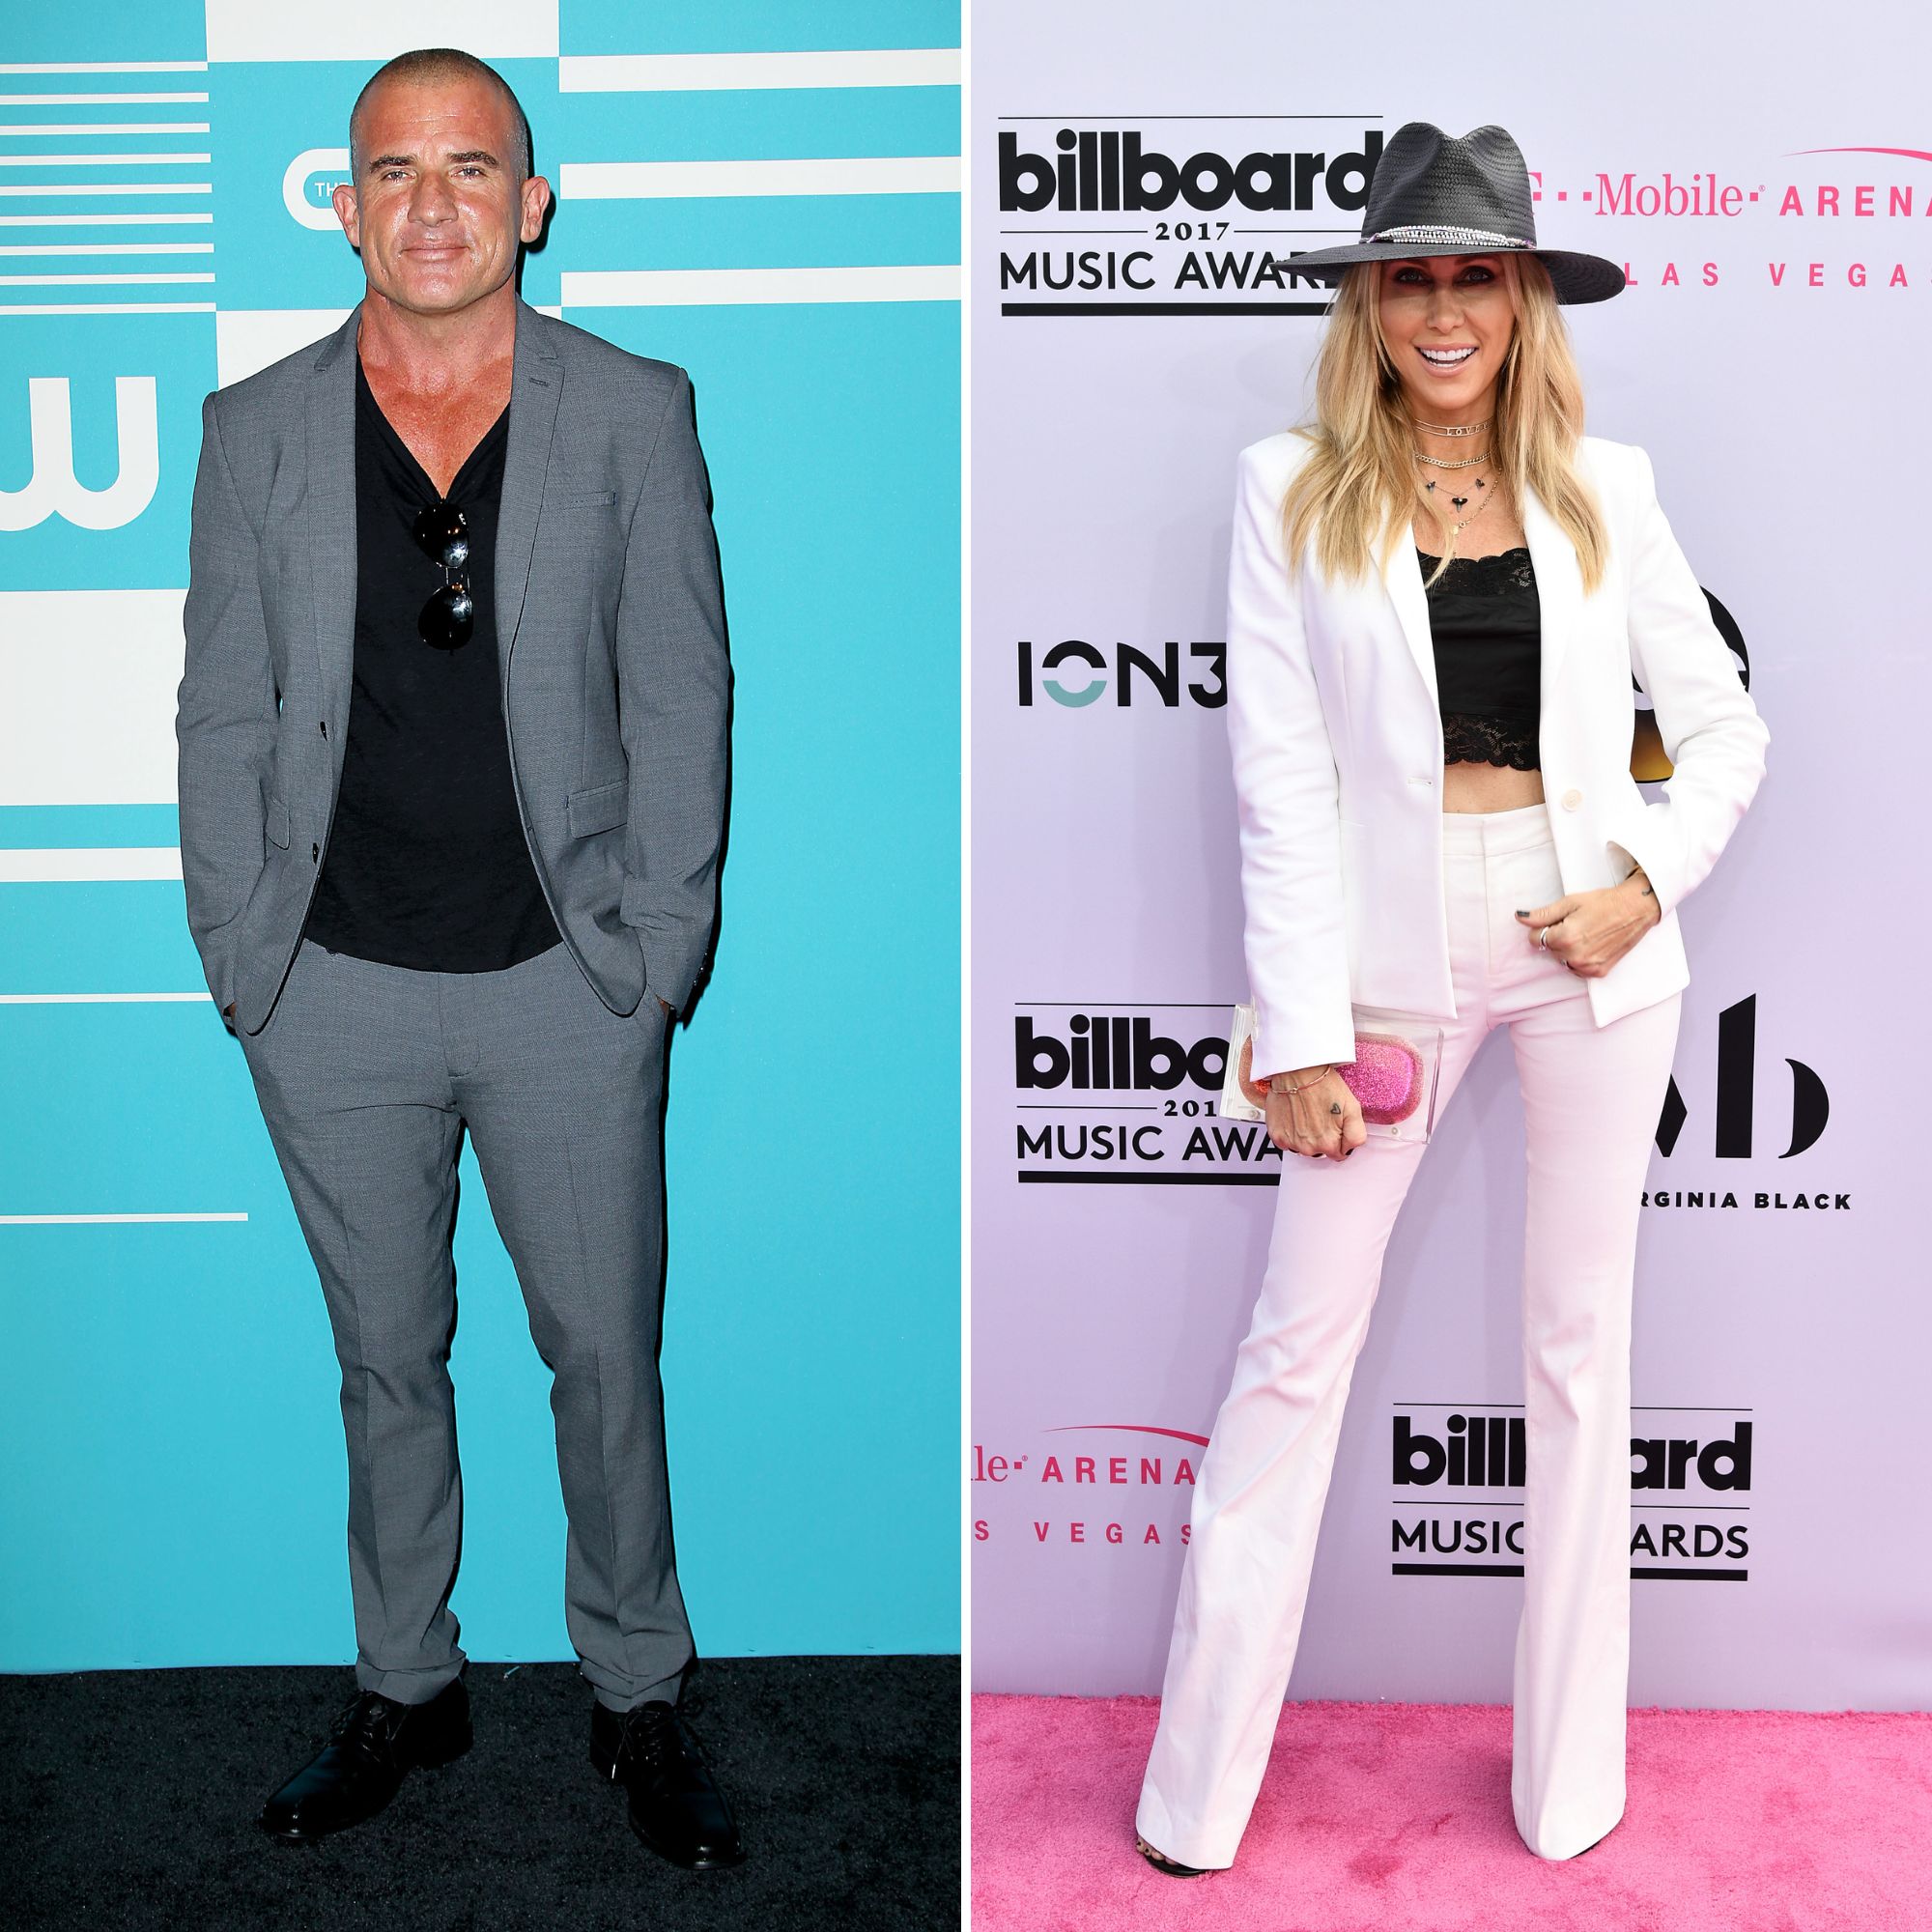 Tish Cyrus Boyfriend: Dominic Purcell Job, Roles, Ex-Wife, More